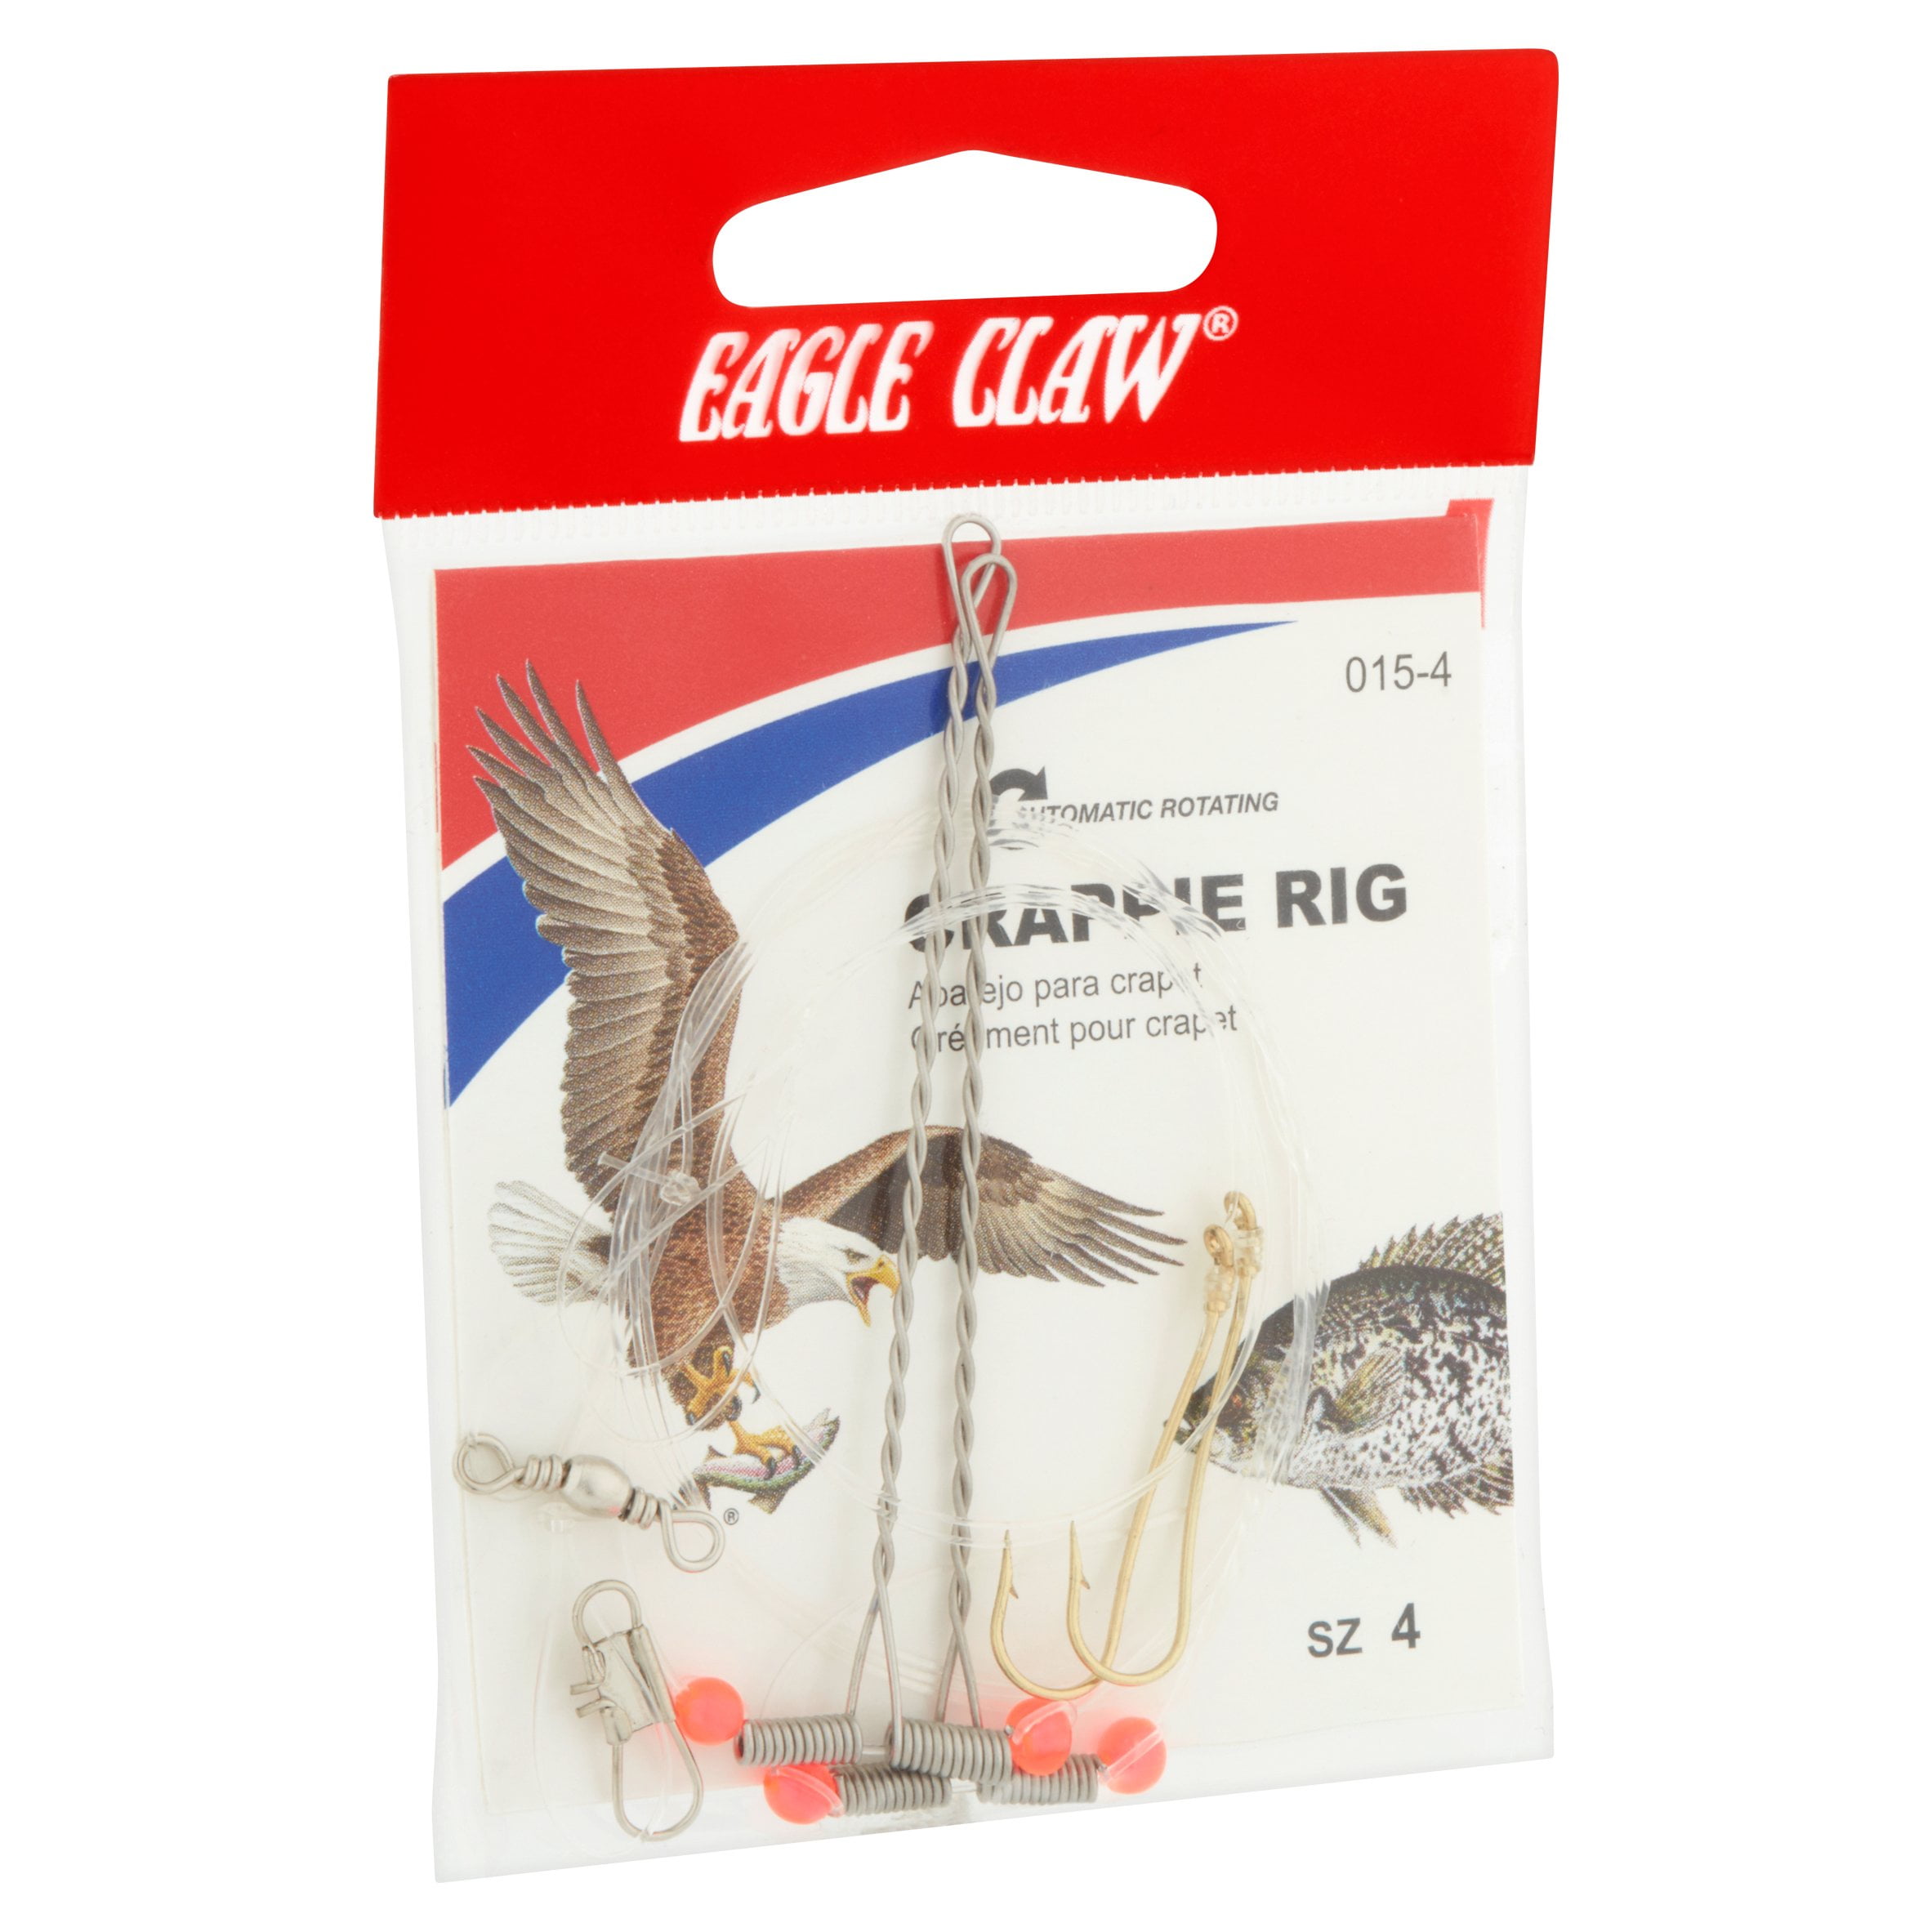 Eagle Claw SPCRPW Crappie Hook Assortment Clam, 46 Piece 